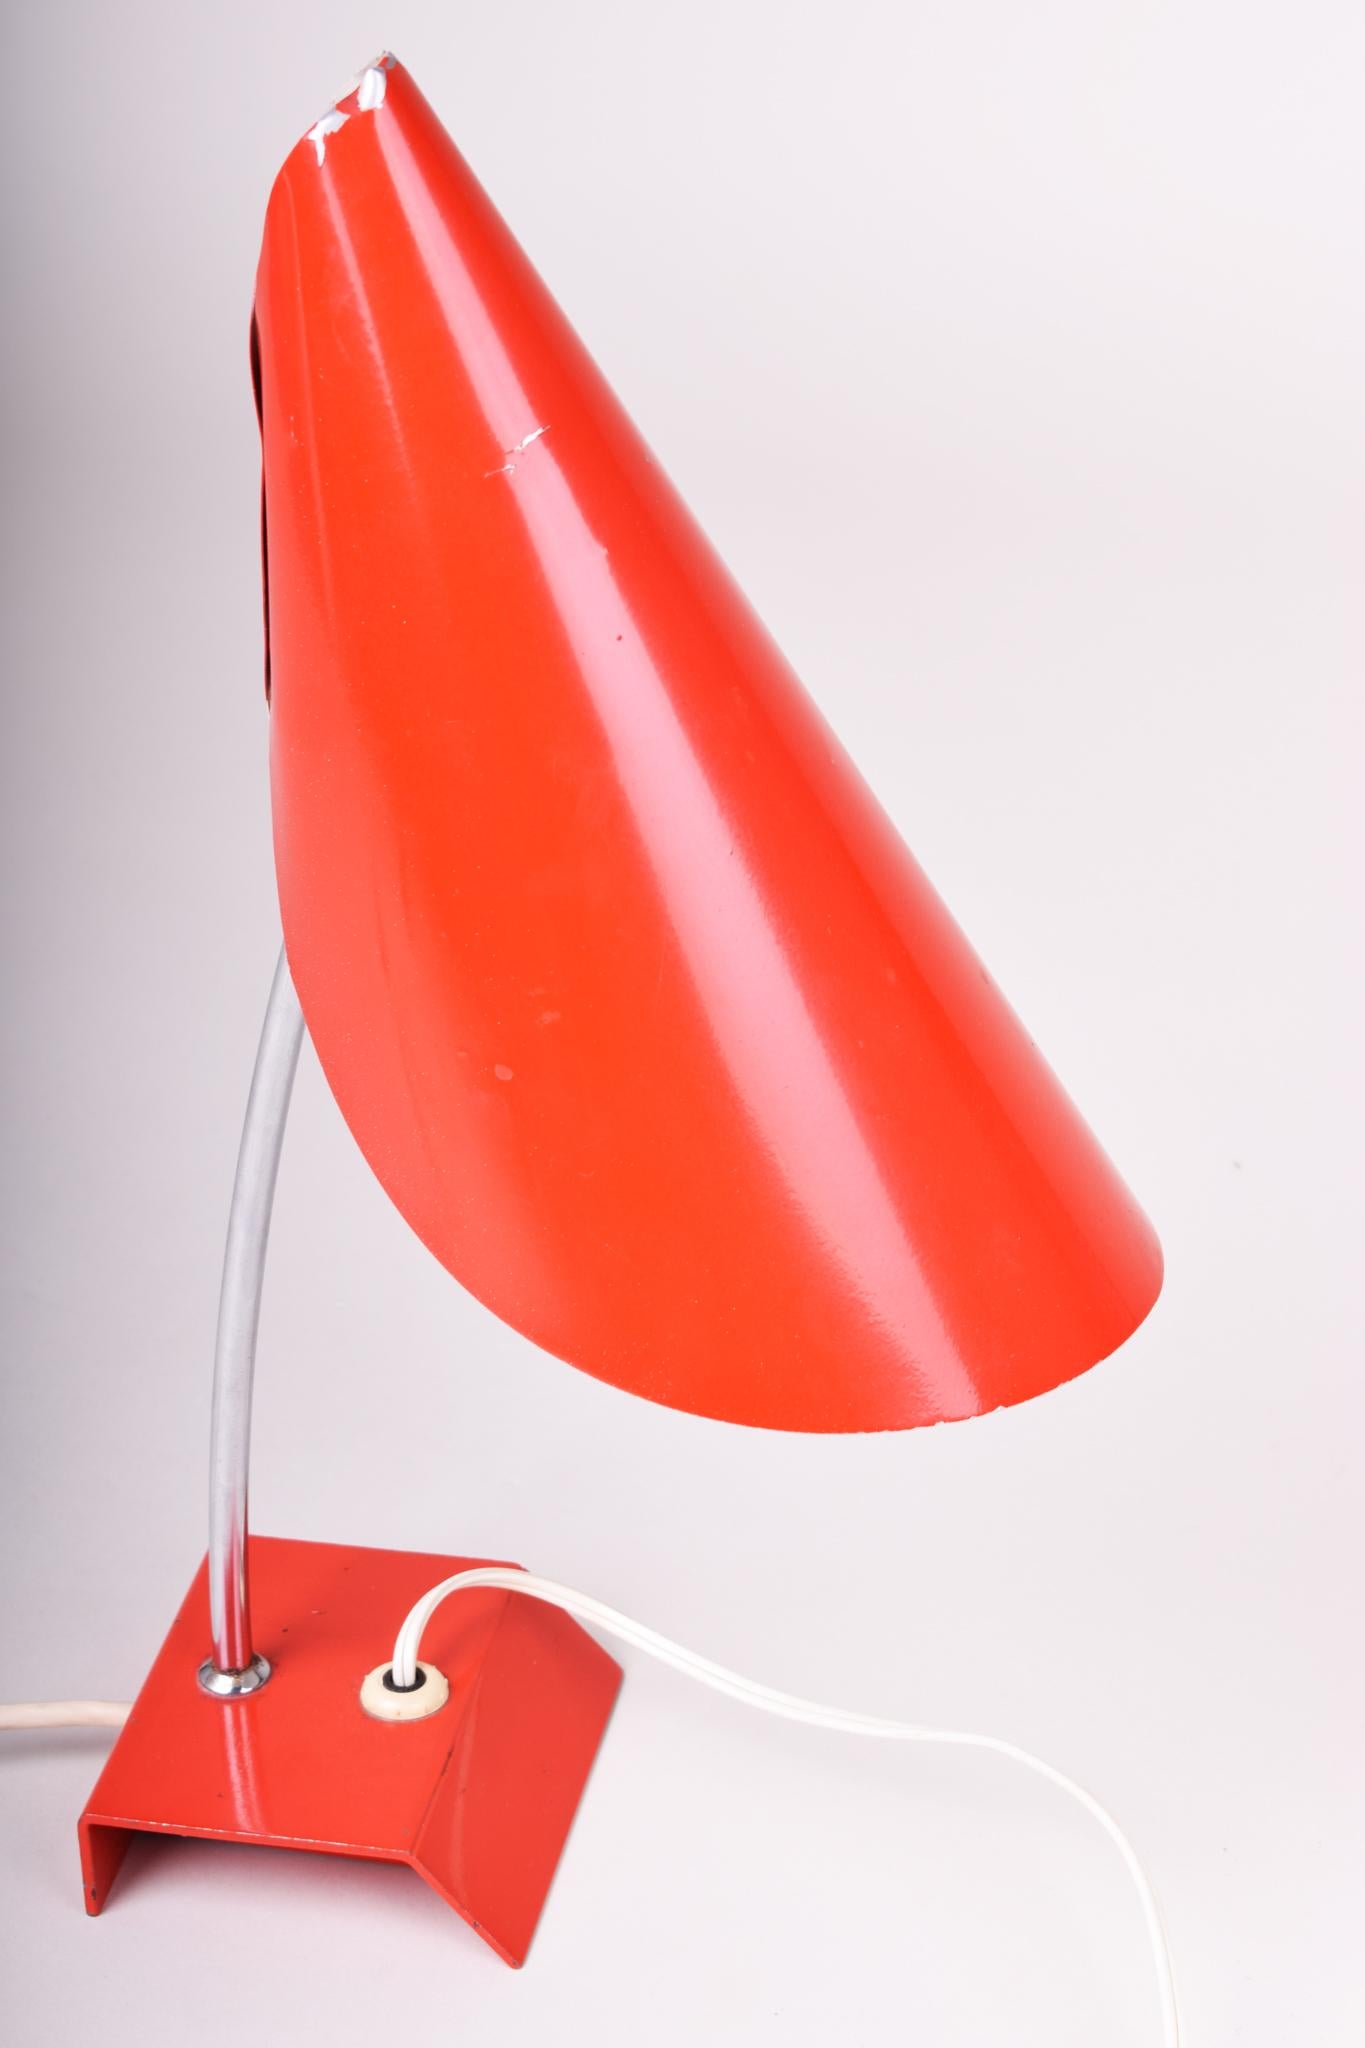 Czech mid century lamp.
Original very well preserved condition. New electrification.

Period: 1960s
Source: Czechia (Czechoslovakia)
Material: Steel.